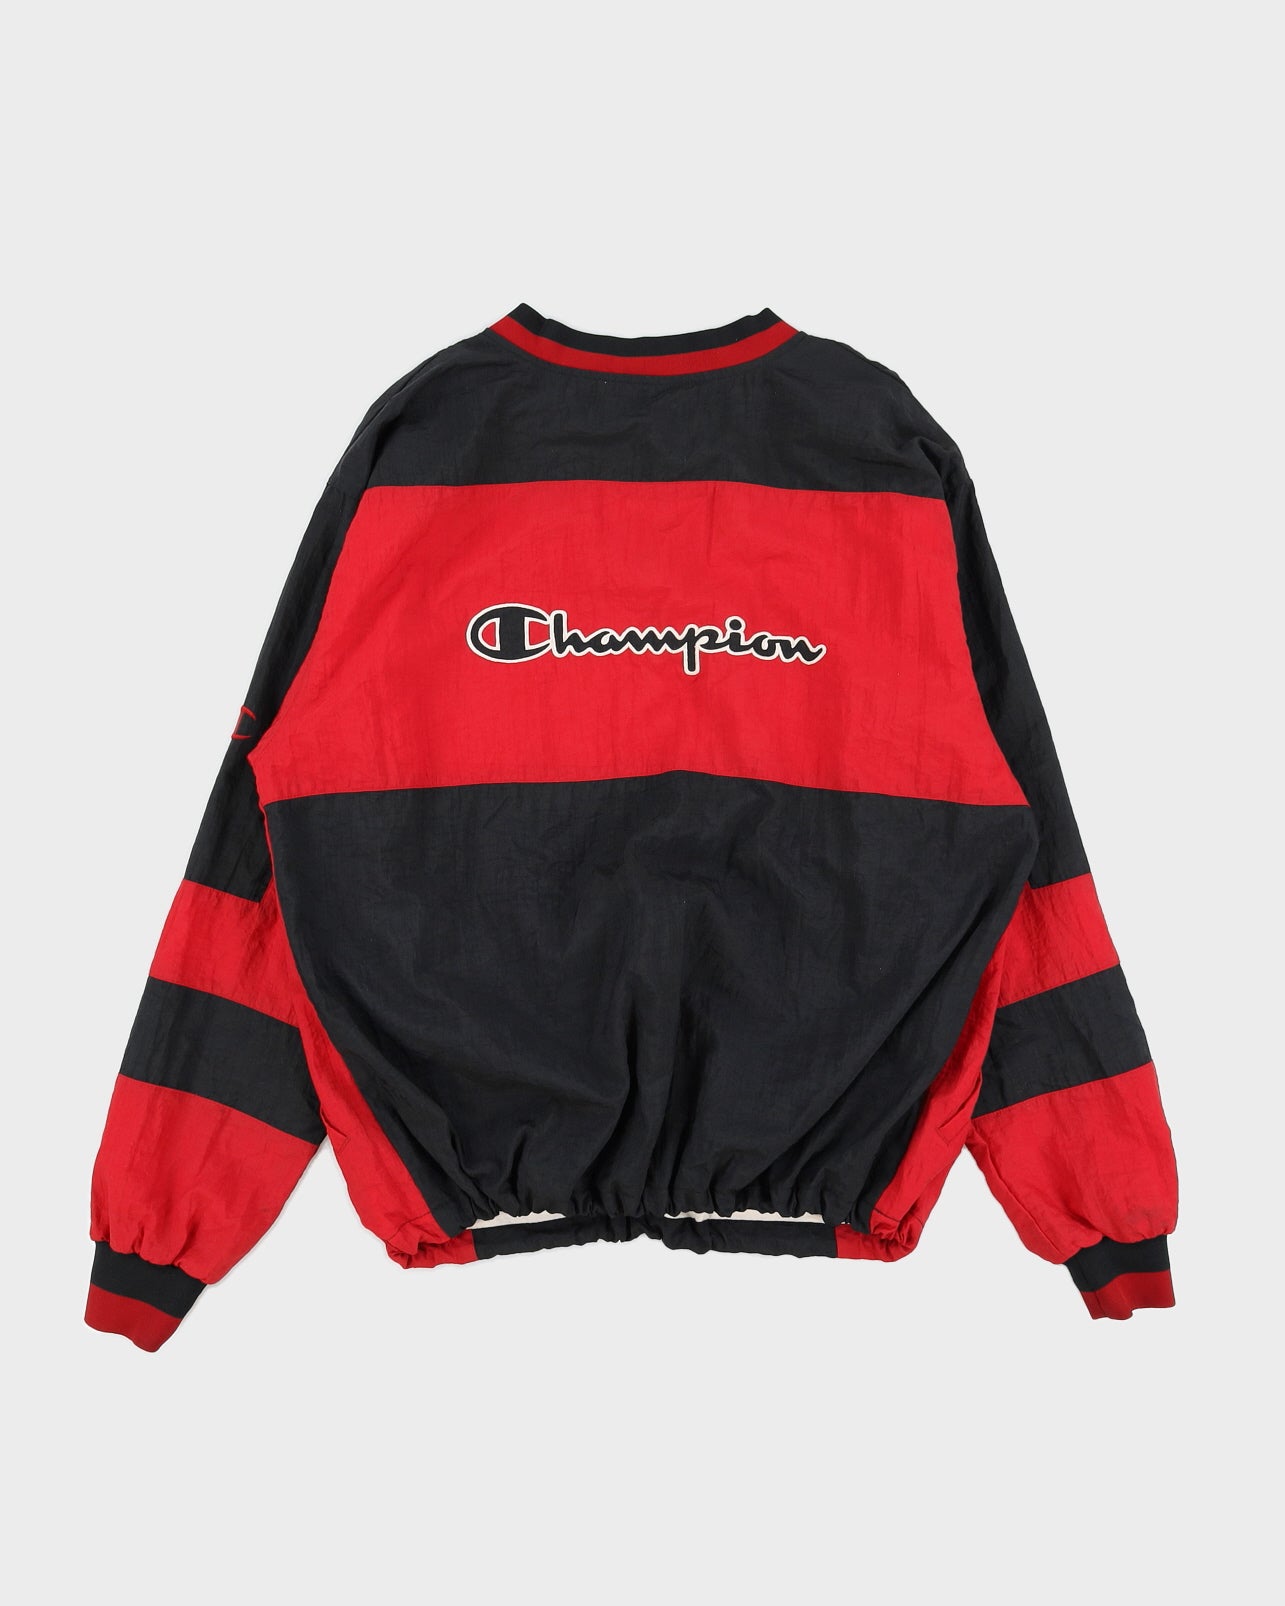 Vintage 90s Champion Black / Red Embroidered Pullover - XL